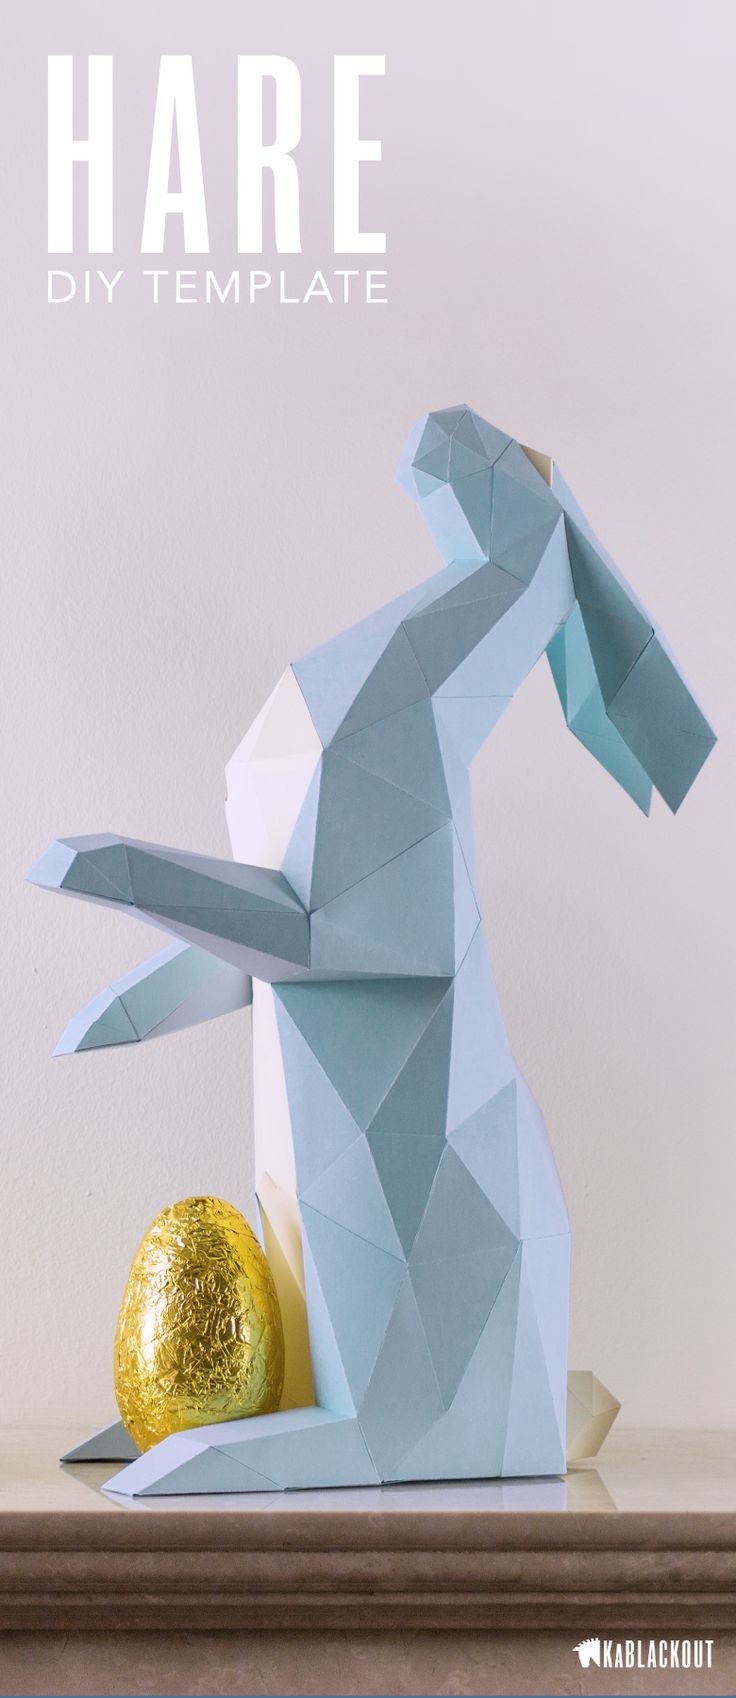 Papercraft Bunny 7 Best Paper Craft Images On Pinterest